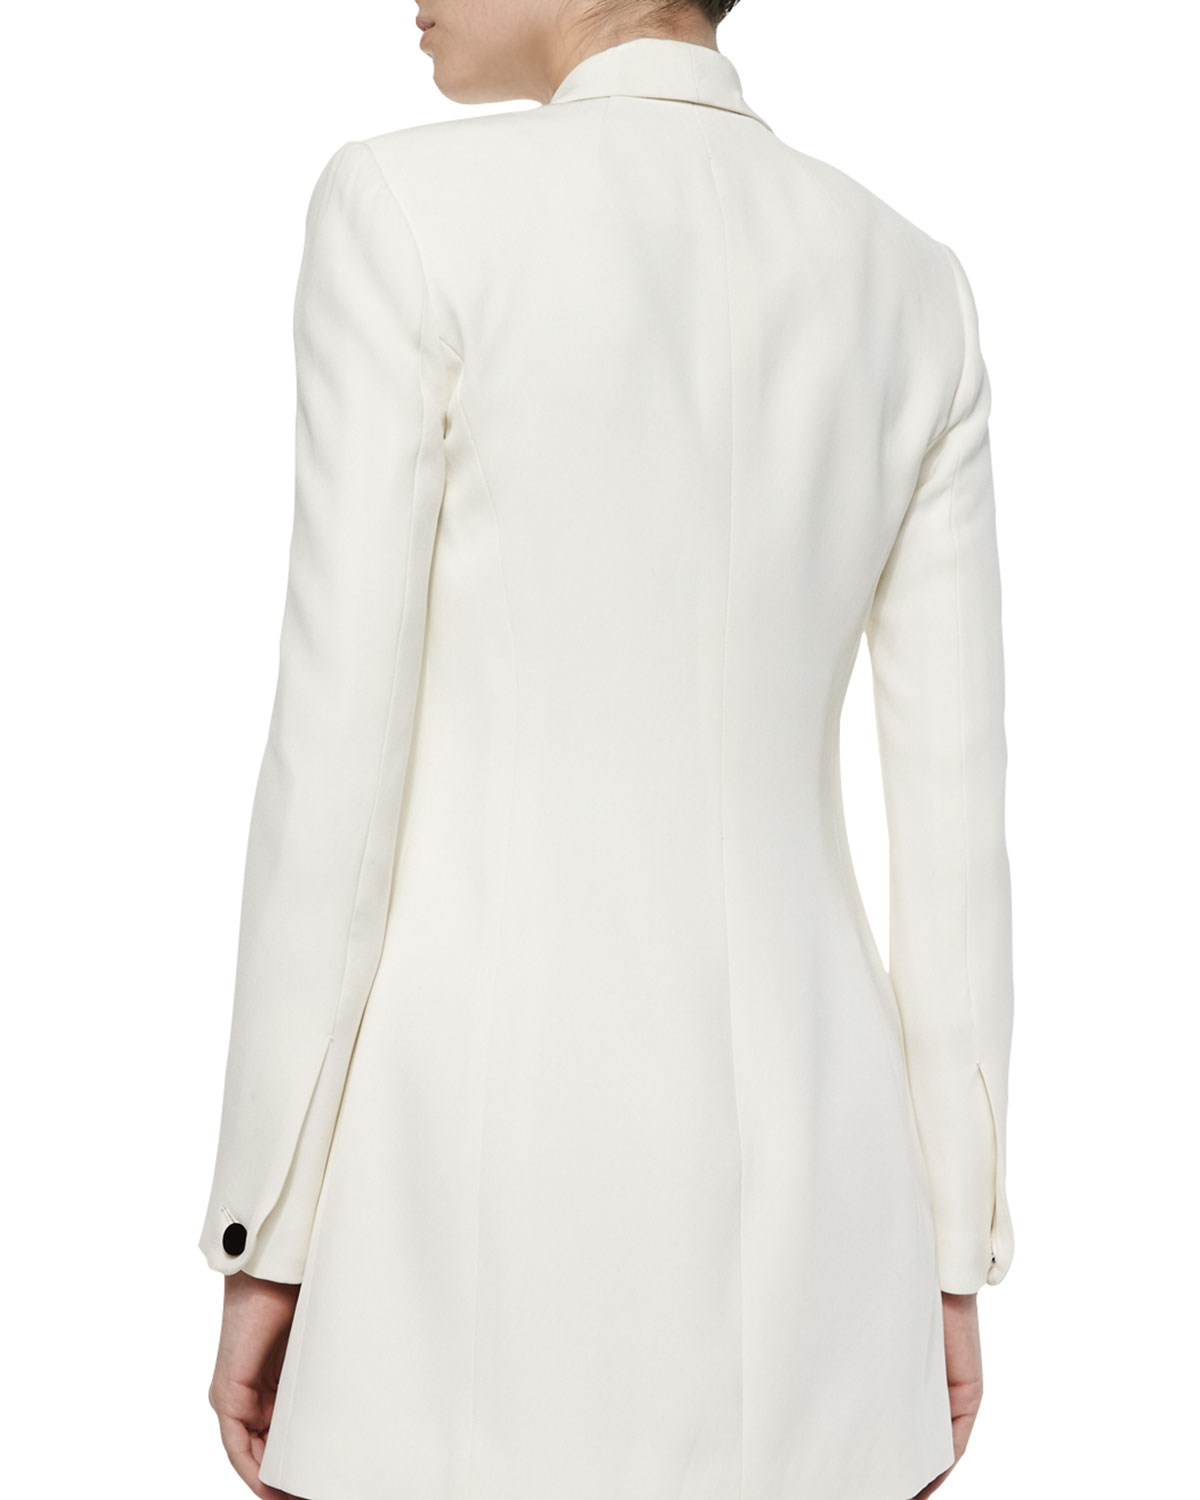 Lyst - Adam lippes Double-Breasted Jacket in White